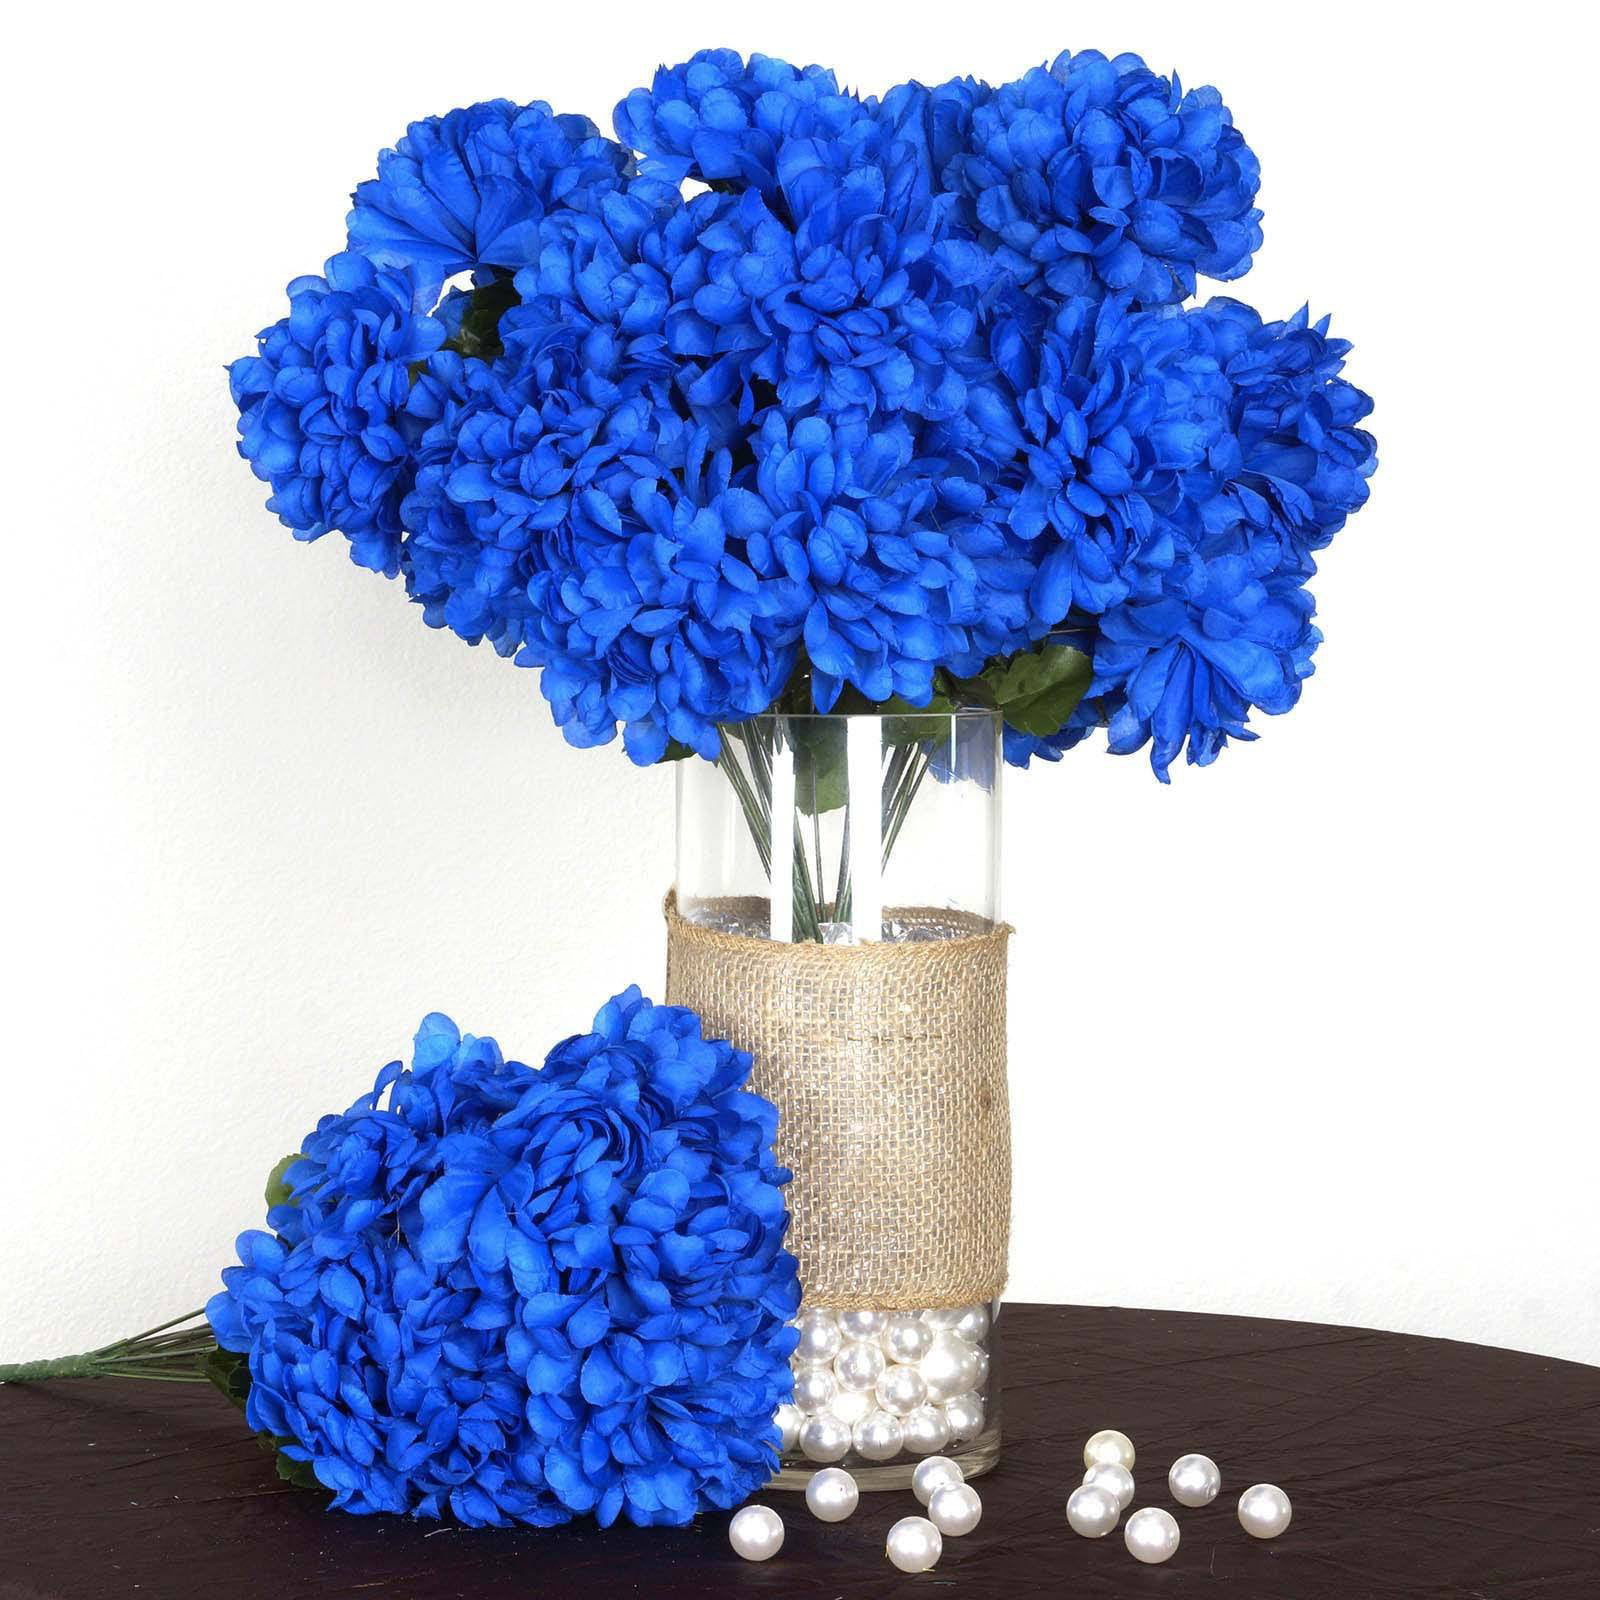 PartyWoo Artificial Flowers 10 pcs, Blue Home Room Decor Chrysanthemum Artificial Flowers for Decoration 10 pcs Silk Flowers with Stems Blue Fake Flowers Wedding Centerpieces Bouquets